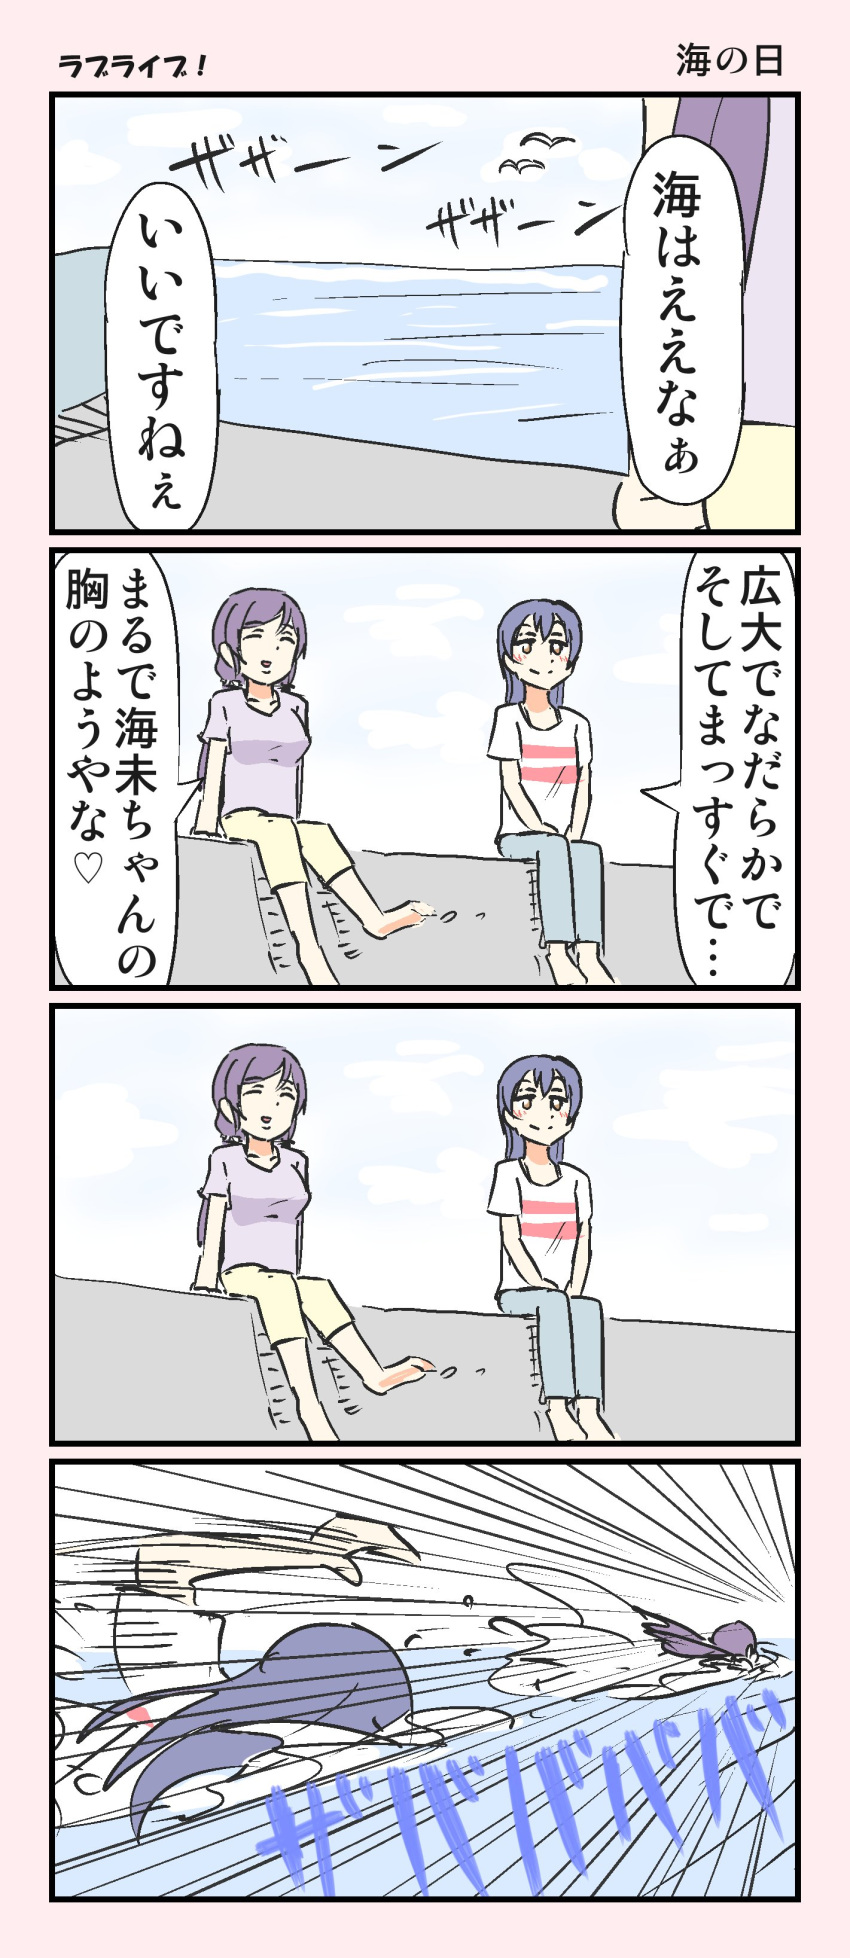 2girls absurdres barefoot bird blue_hair blush breast_conscious chasing closed_eyes comic fleeing hands_on_lap highres love_live! love_live!_school_idol_project multiple_girls ocean purple_hair seagull shirt sitting sketch smile sonoda_umi swimming t-shirt taishi22 toujou_nozomi translated trolling